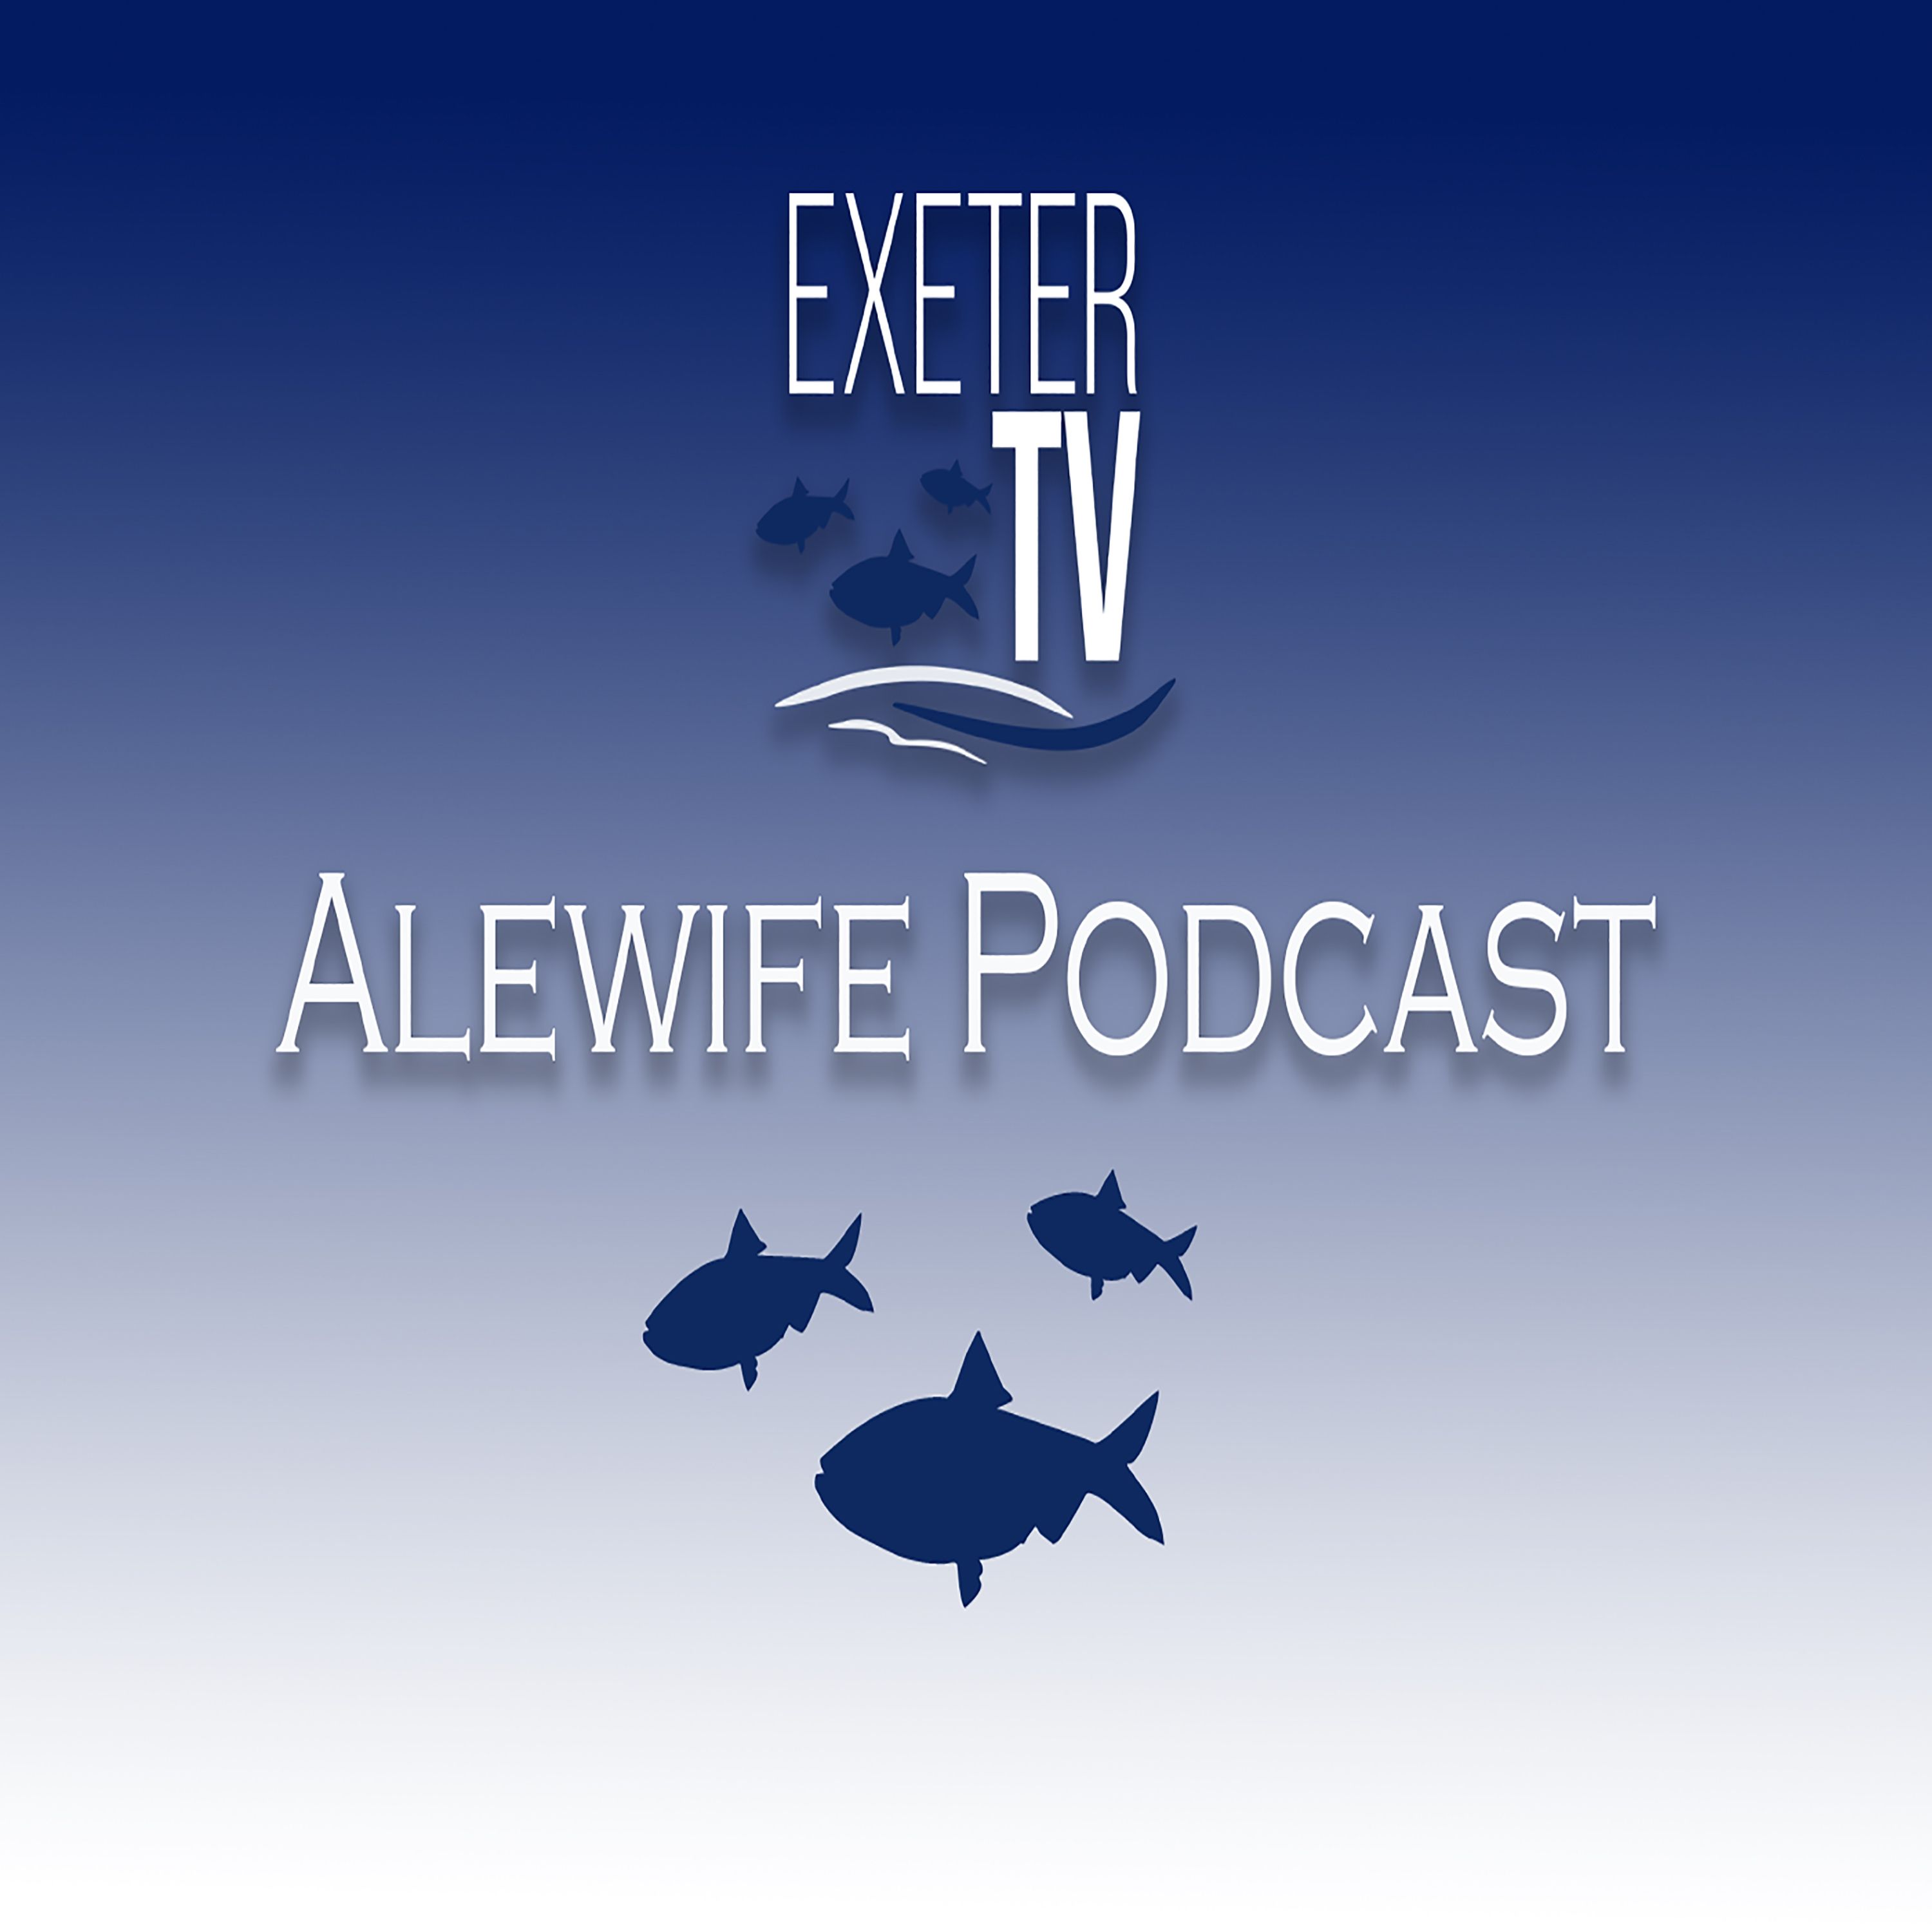 August 2018 Alewife Podcast